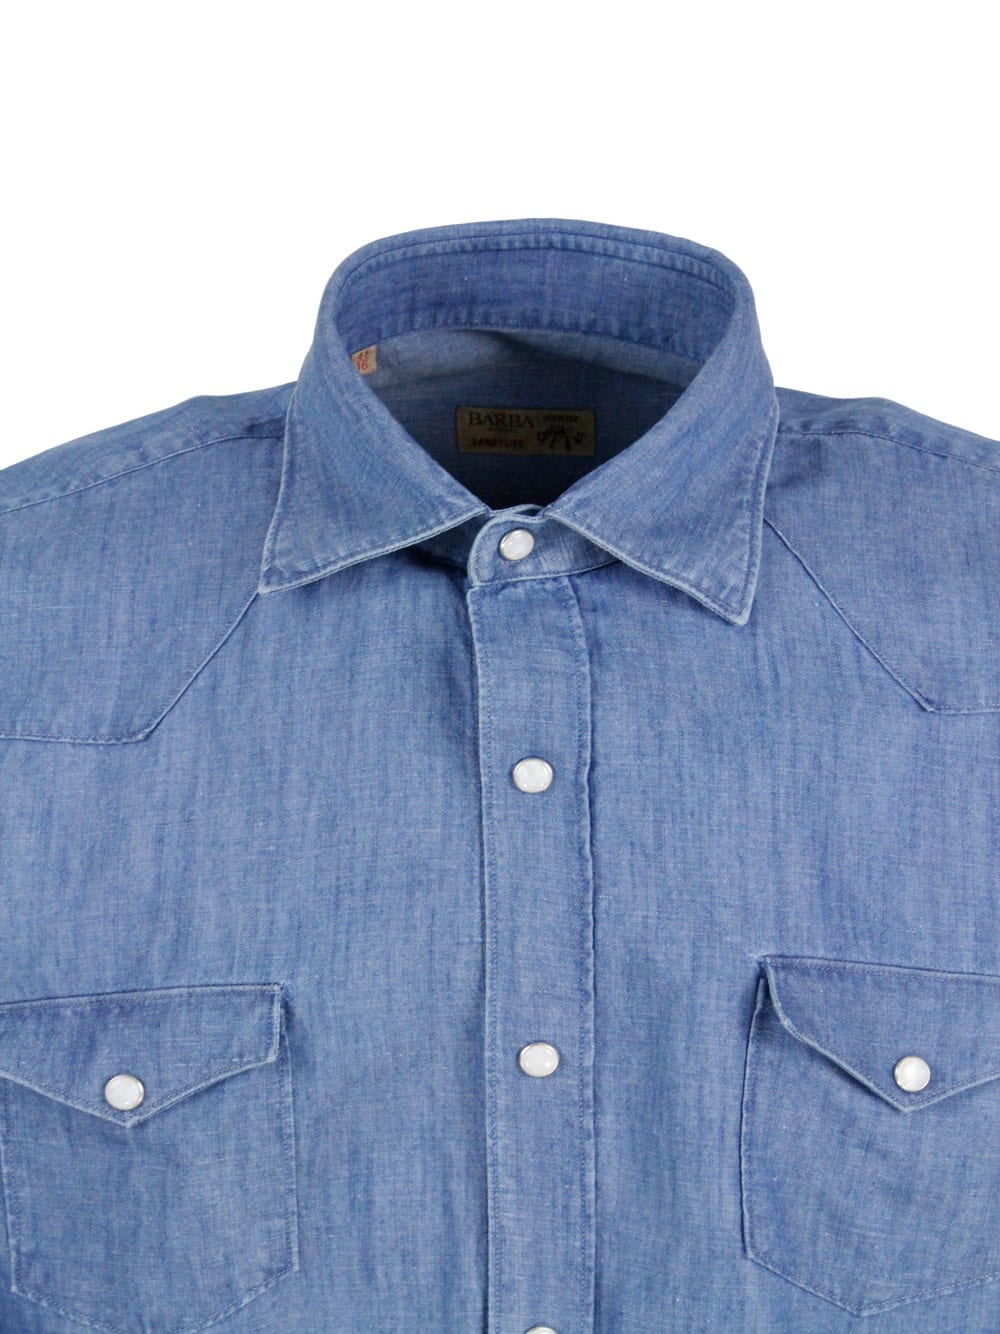 Shop Barba Napoli Dandylife Shirt In Light Denim With Hand-stitched Italian Collar And Front Pocket Counters. The Butt